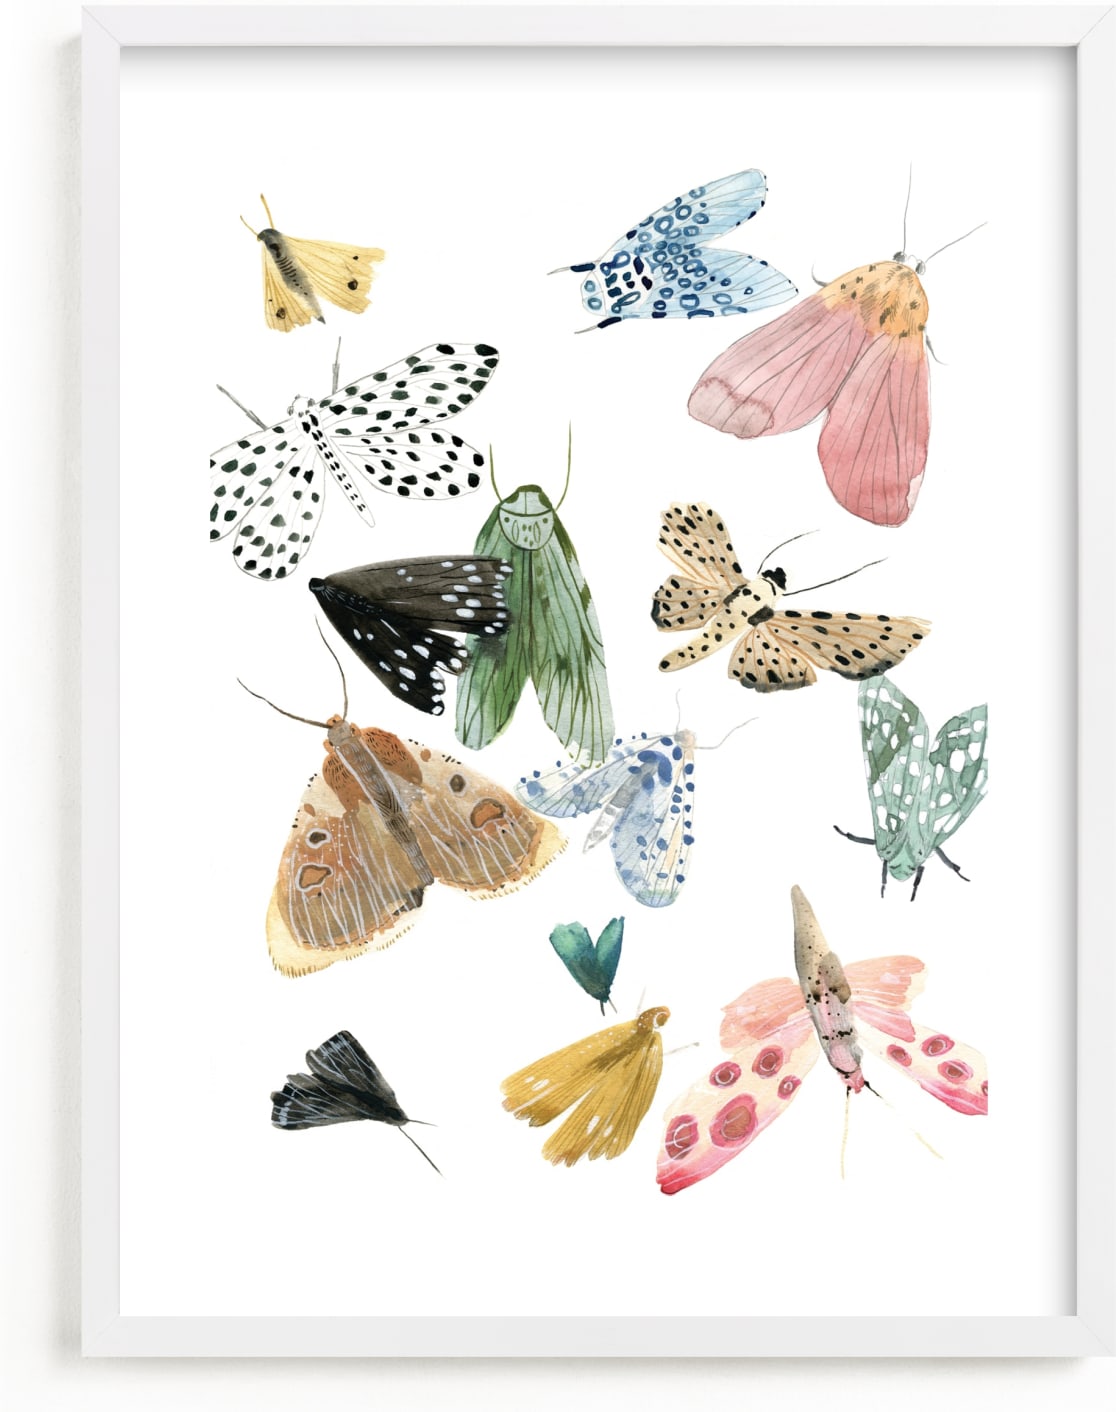 This is a colorful kids wall art by Emilie Simpson called Moths.